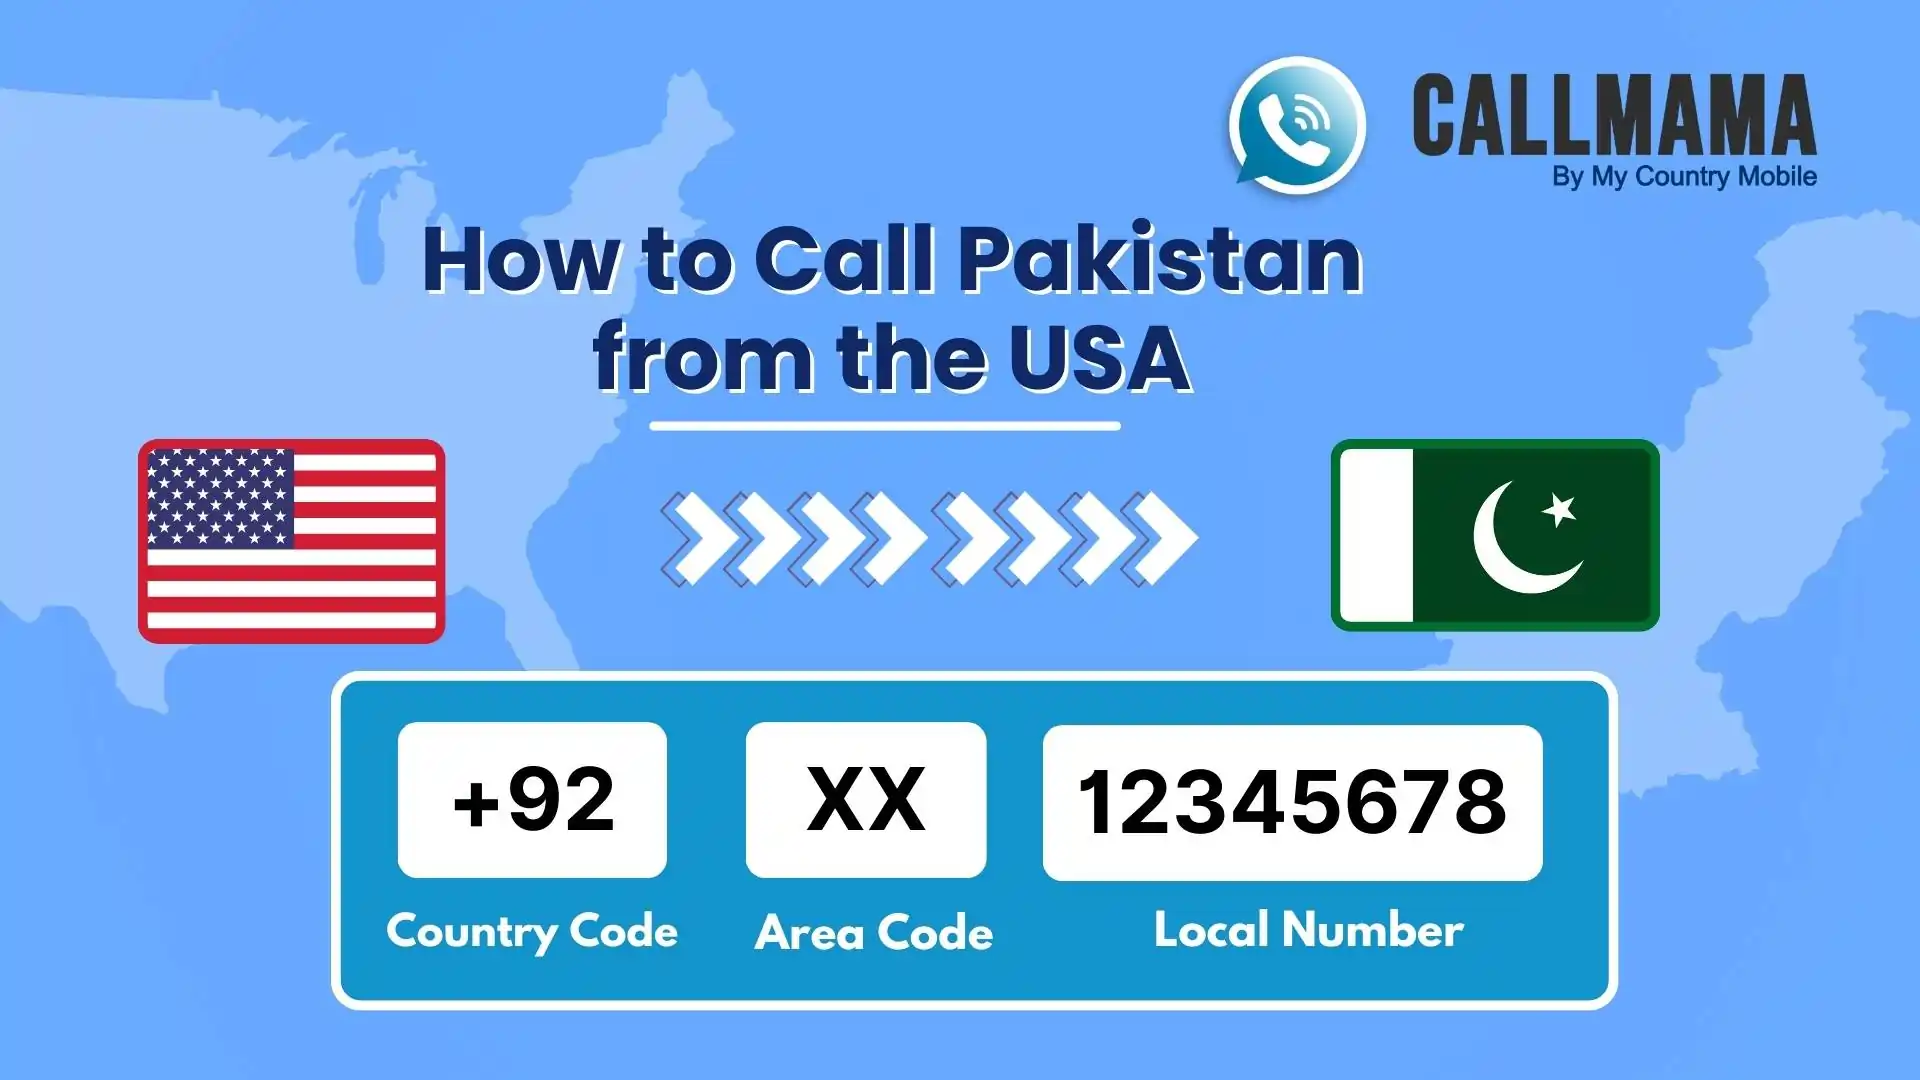 Call Pakistan from the USA